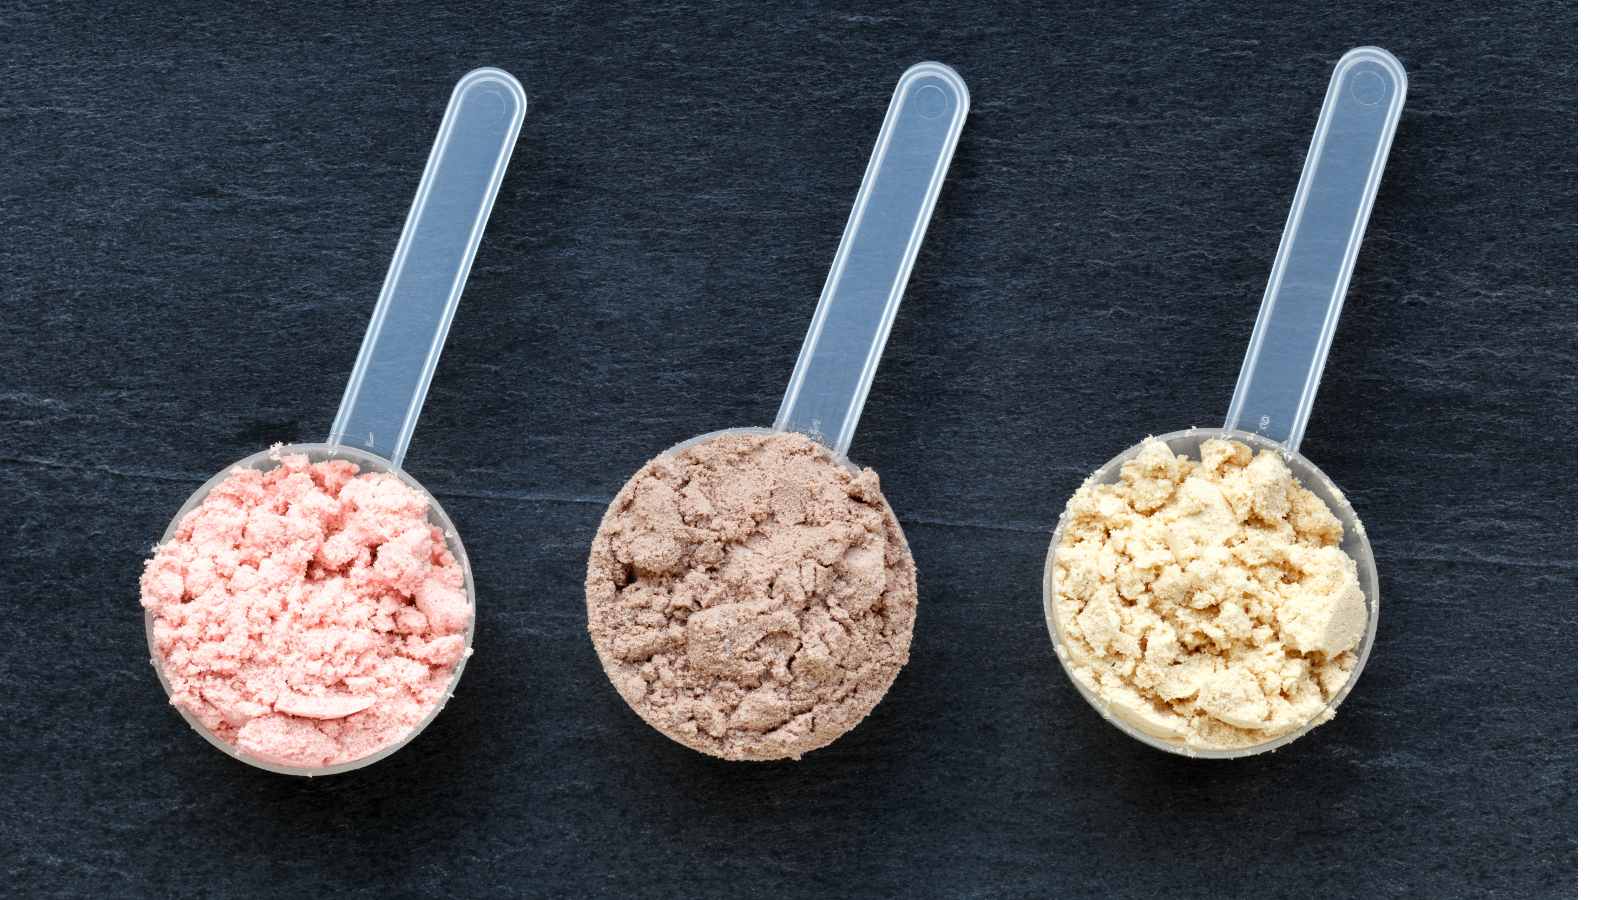 How to choose the best protein powder for you?